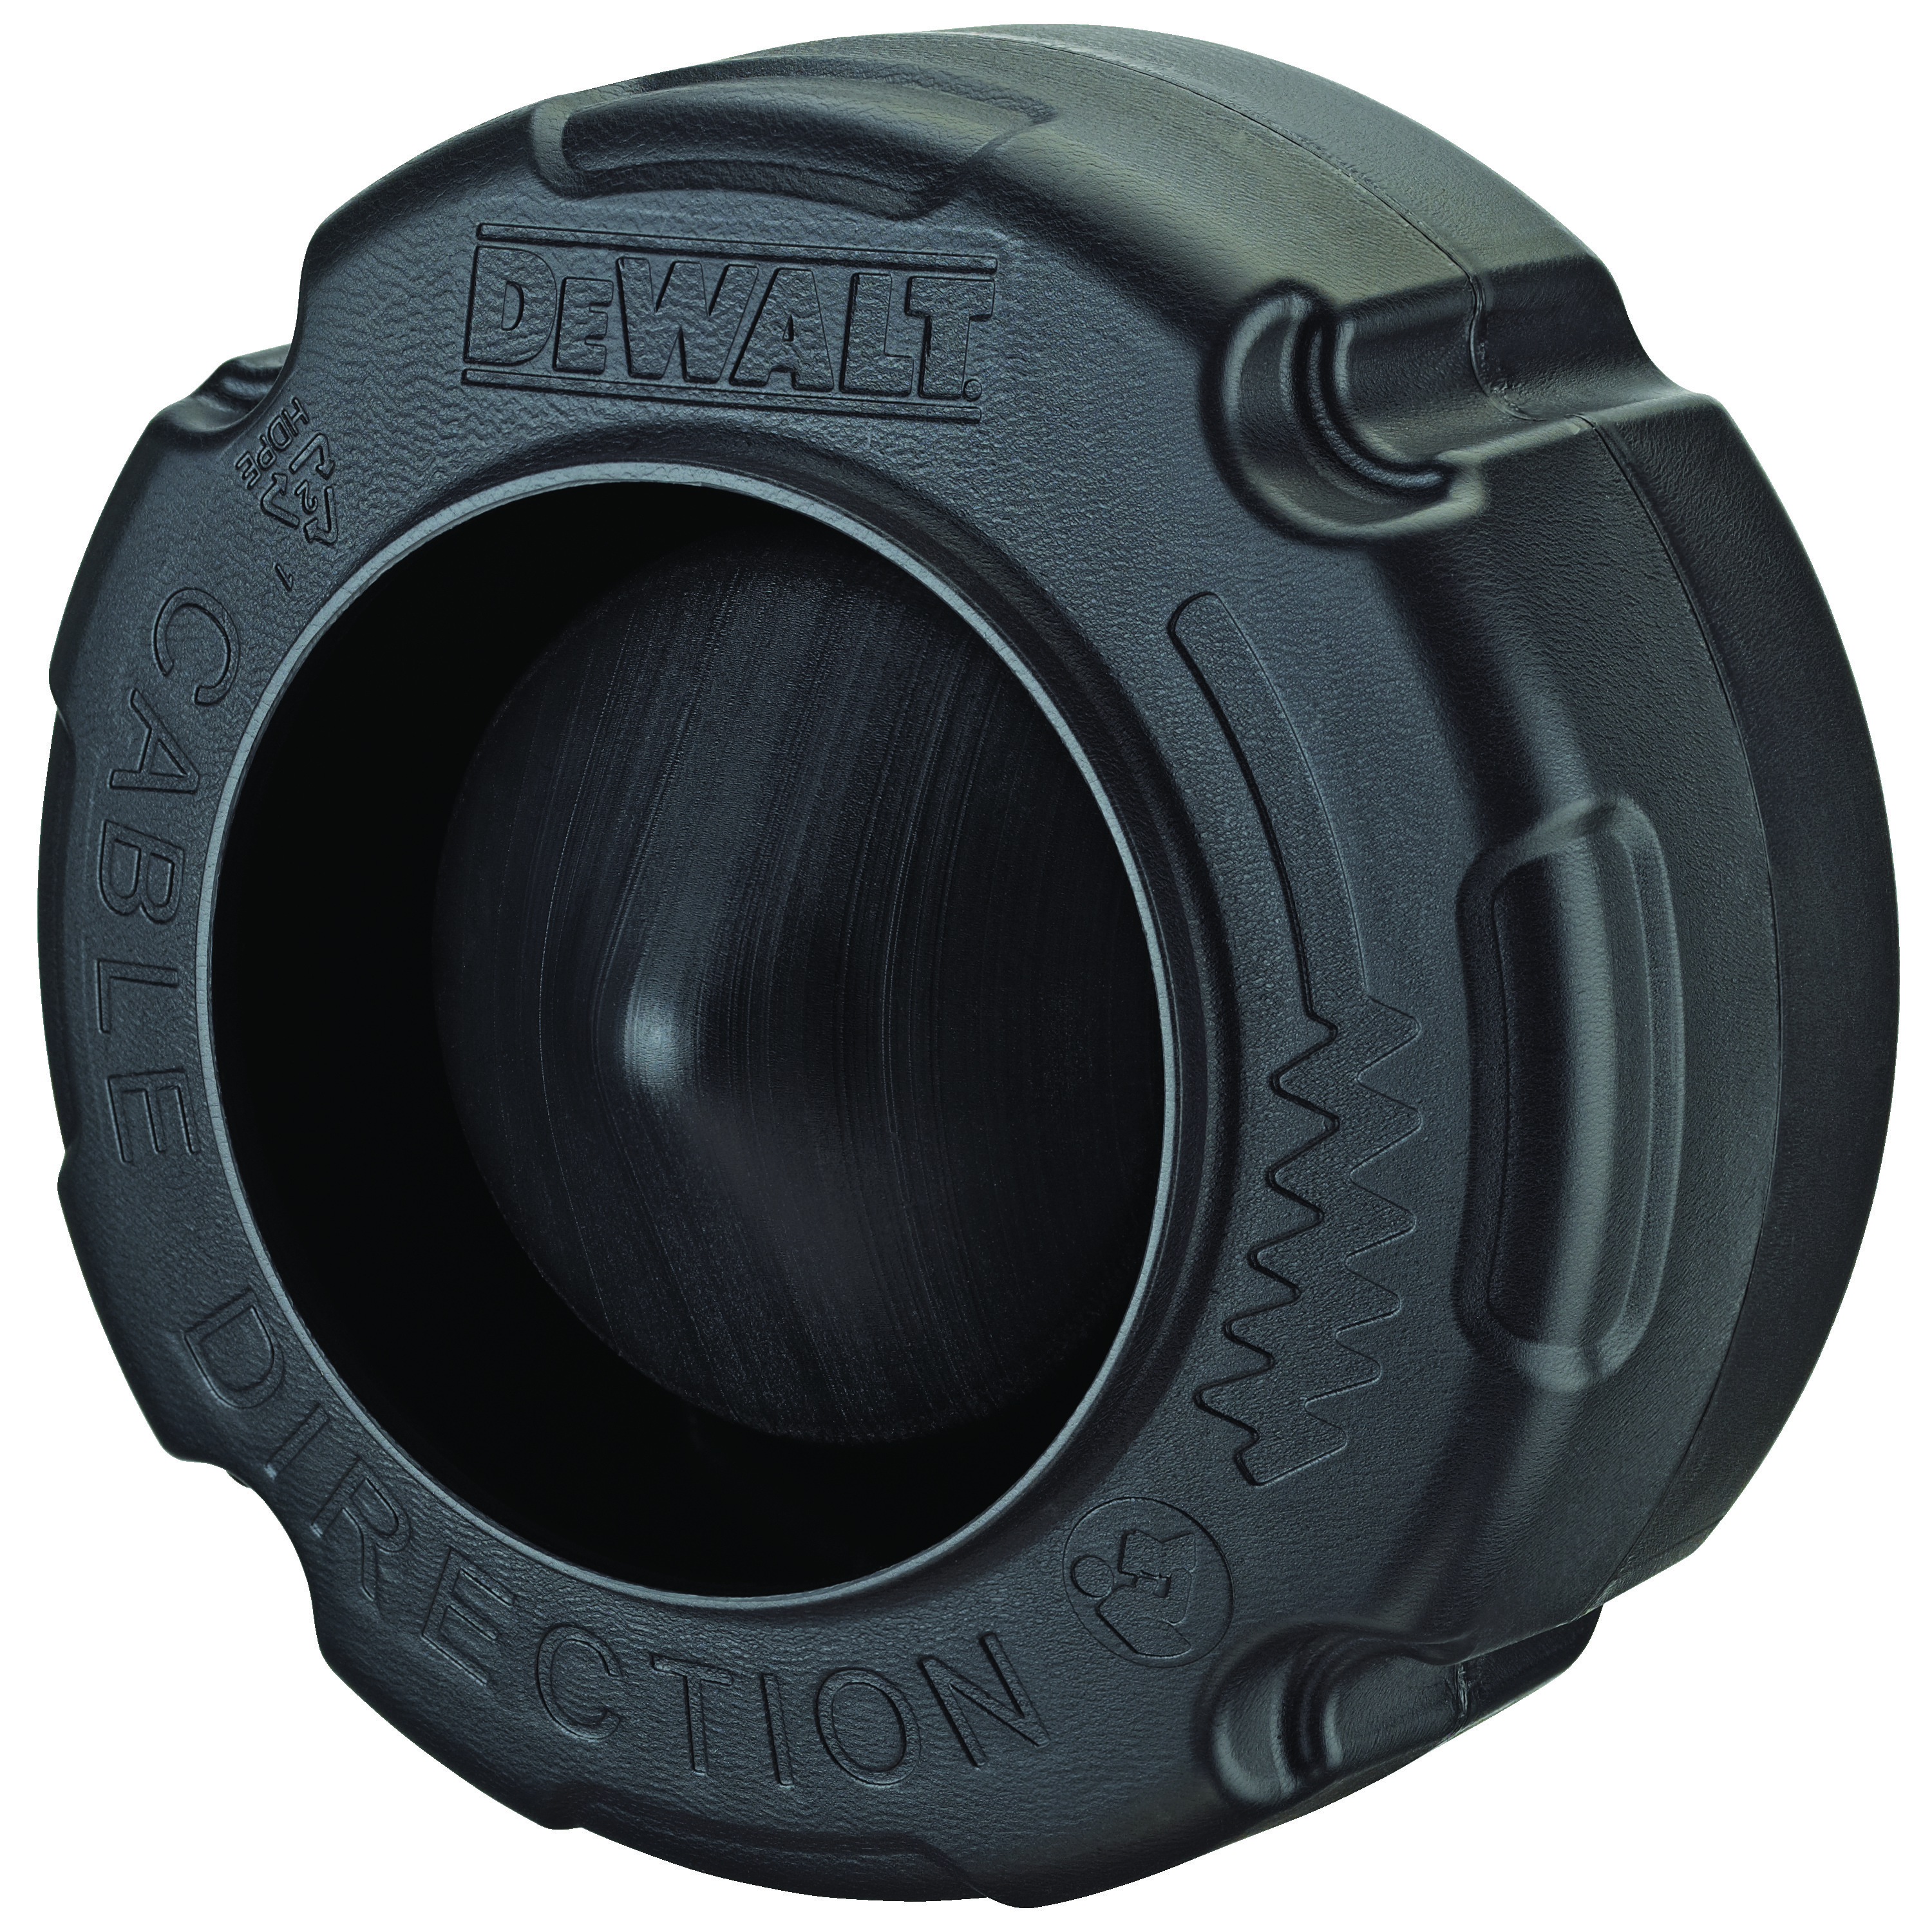 DeWALT® DCD2000 Replacement Drum, For Use With DCD200 Drain Snake, 1/2 in and 3/8 in Hoses, 3/8 in x 35 ft and 5/16 in x 50 ft Cable, Polyethylene Plastic